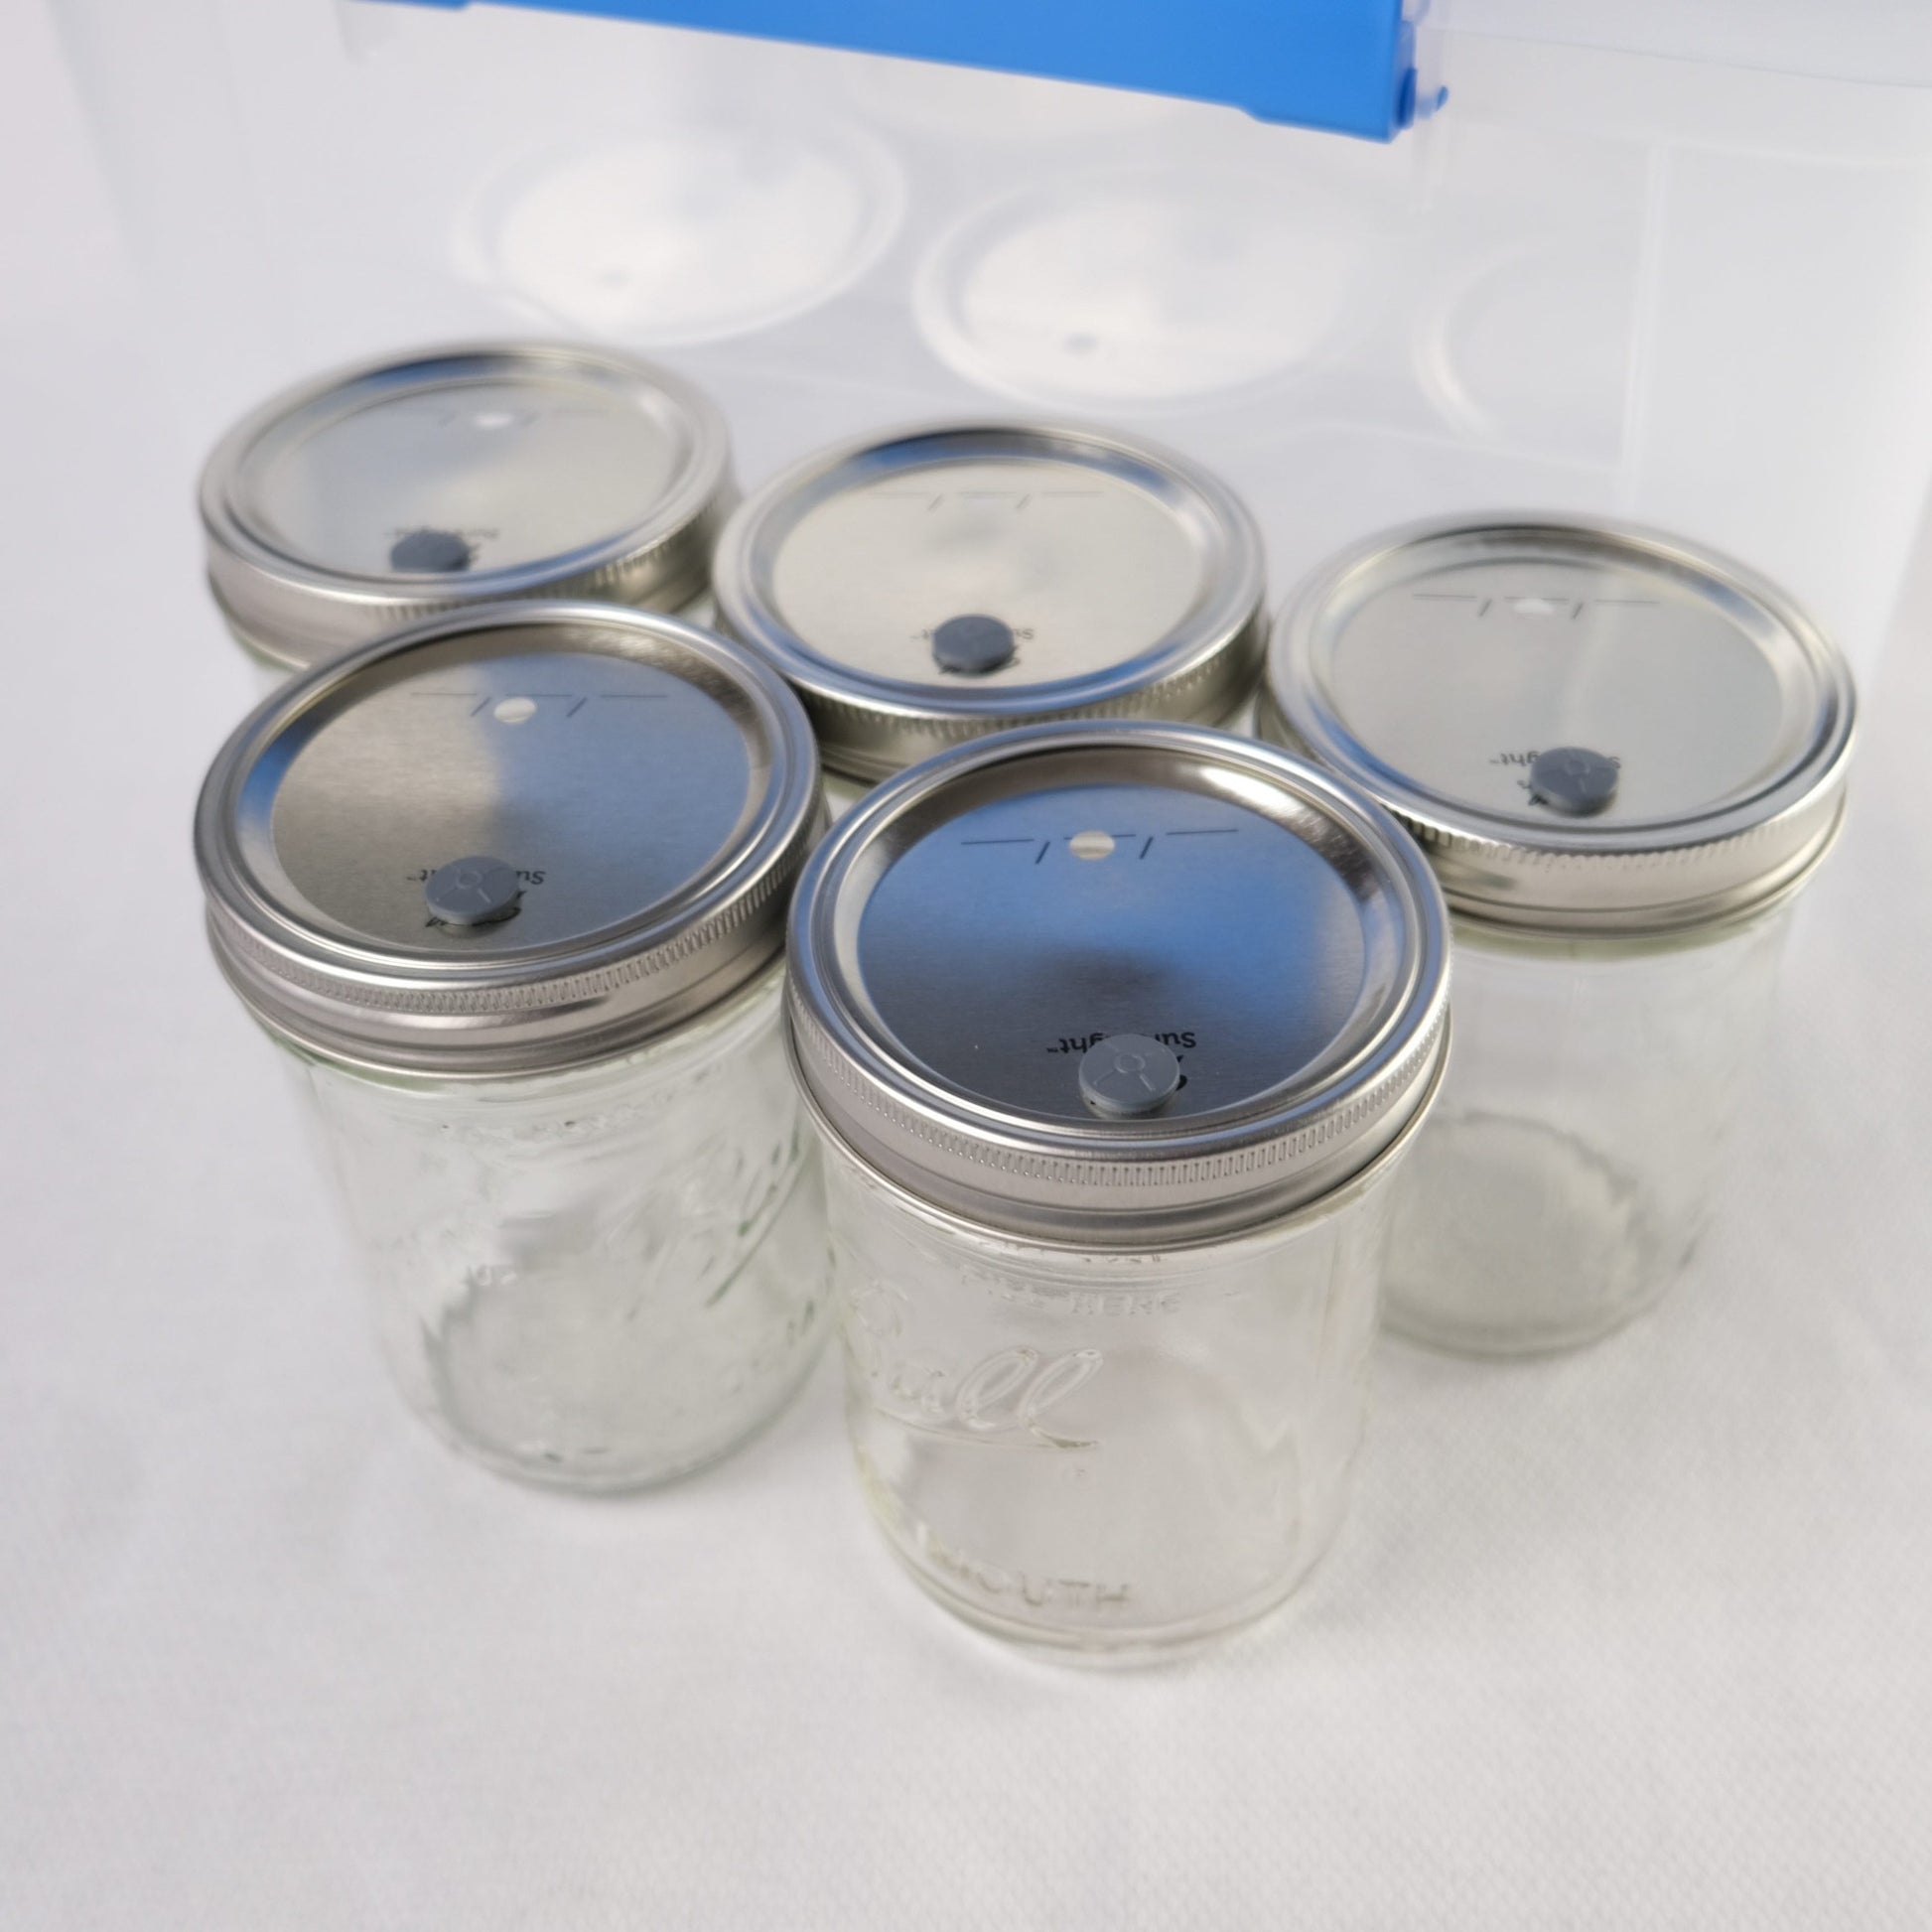 Five glass spawn jars with lids and rings included. The lids have been pre-drilled for the ventilation holes and rubber injection ports; the injection ports are installed in the lids. These are the jars that you will use to cultivate the mycelium (aka grain spawn) for your monotub. 